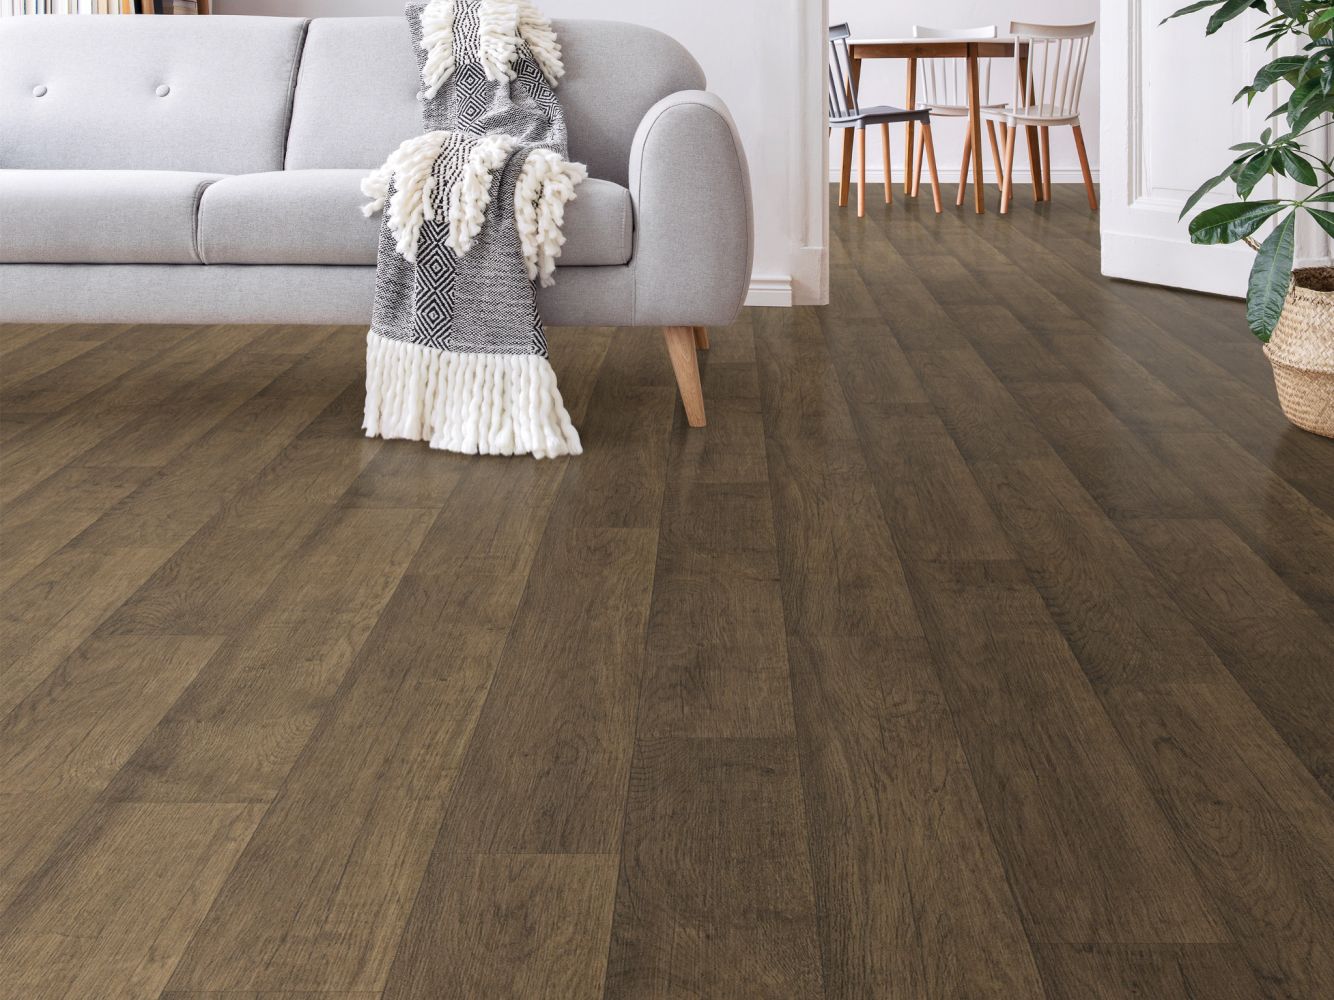 Shaw Floors Resilient Residential Natural Luxe  55g Dobbins 00743_VG089